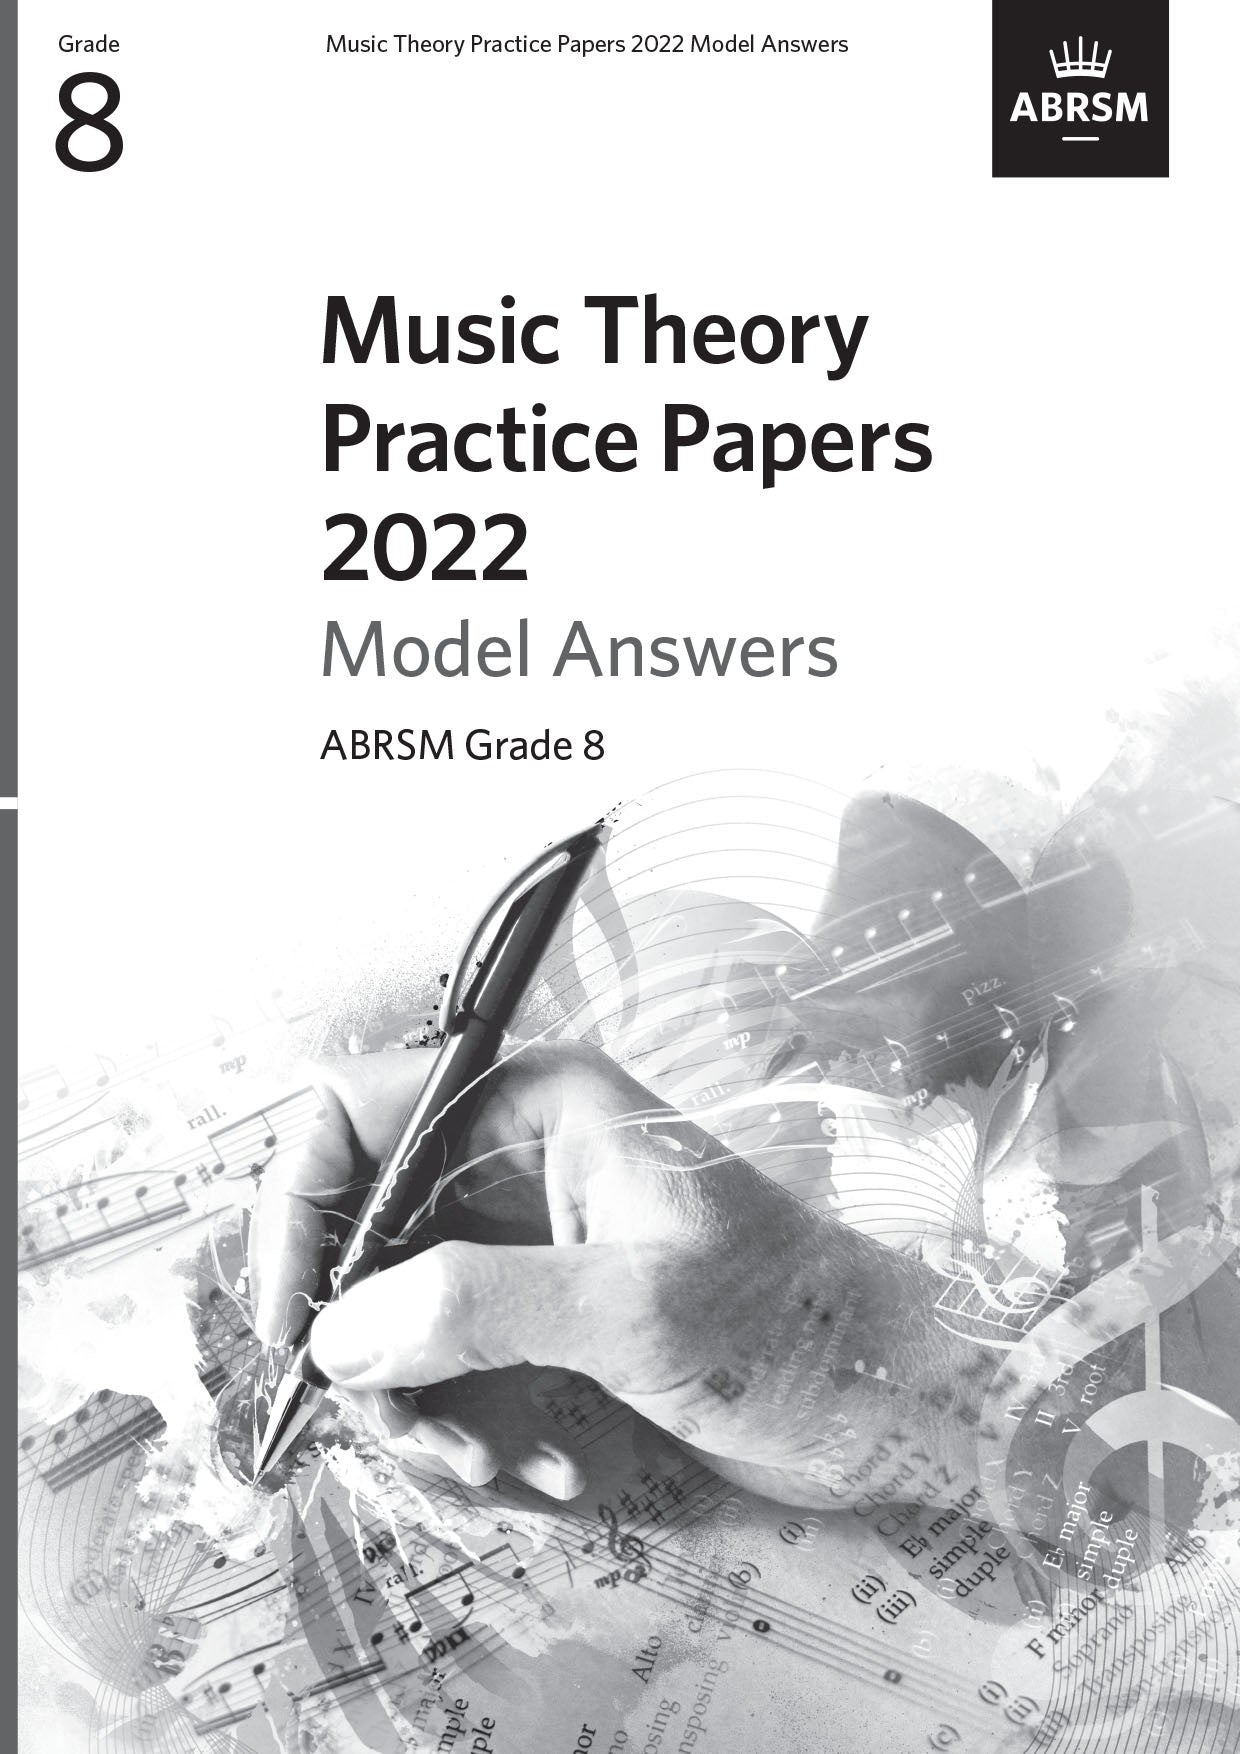 ABRSM Music Theory Practice Papers Model Answers 2022 Grade 8